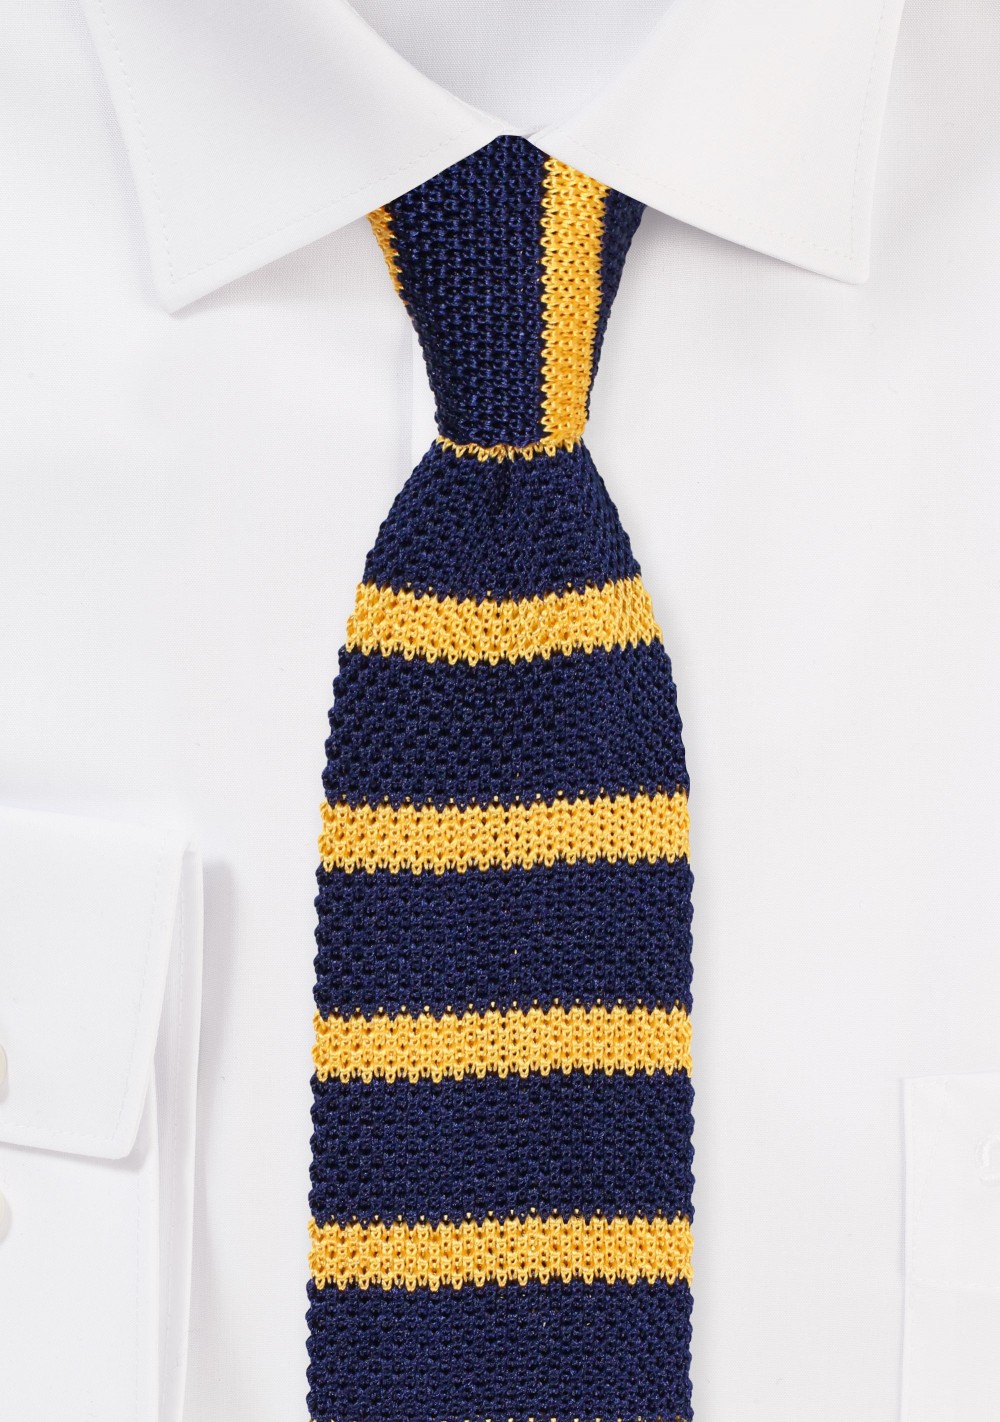 Silk Knit Tie in Navy and Amber Gold